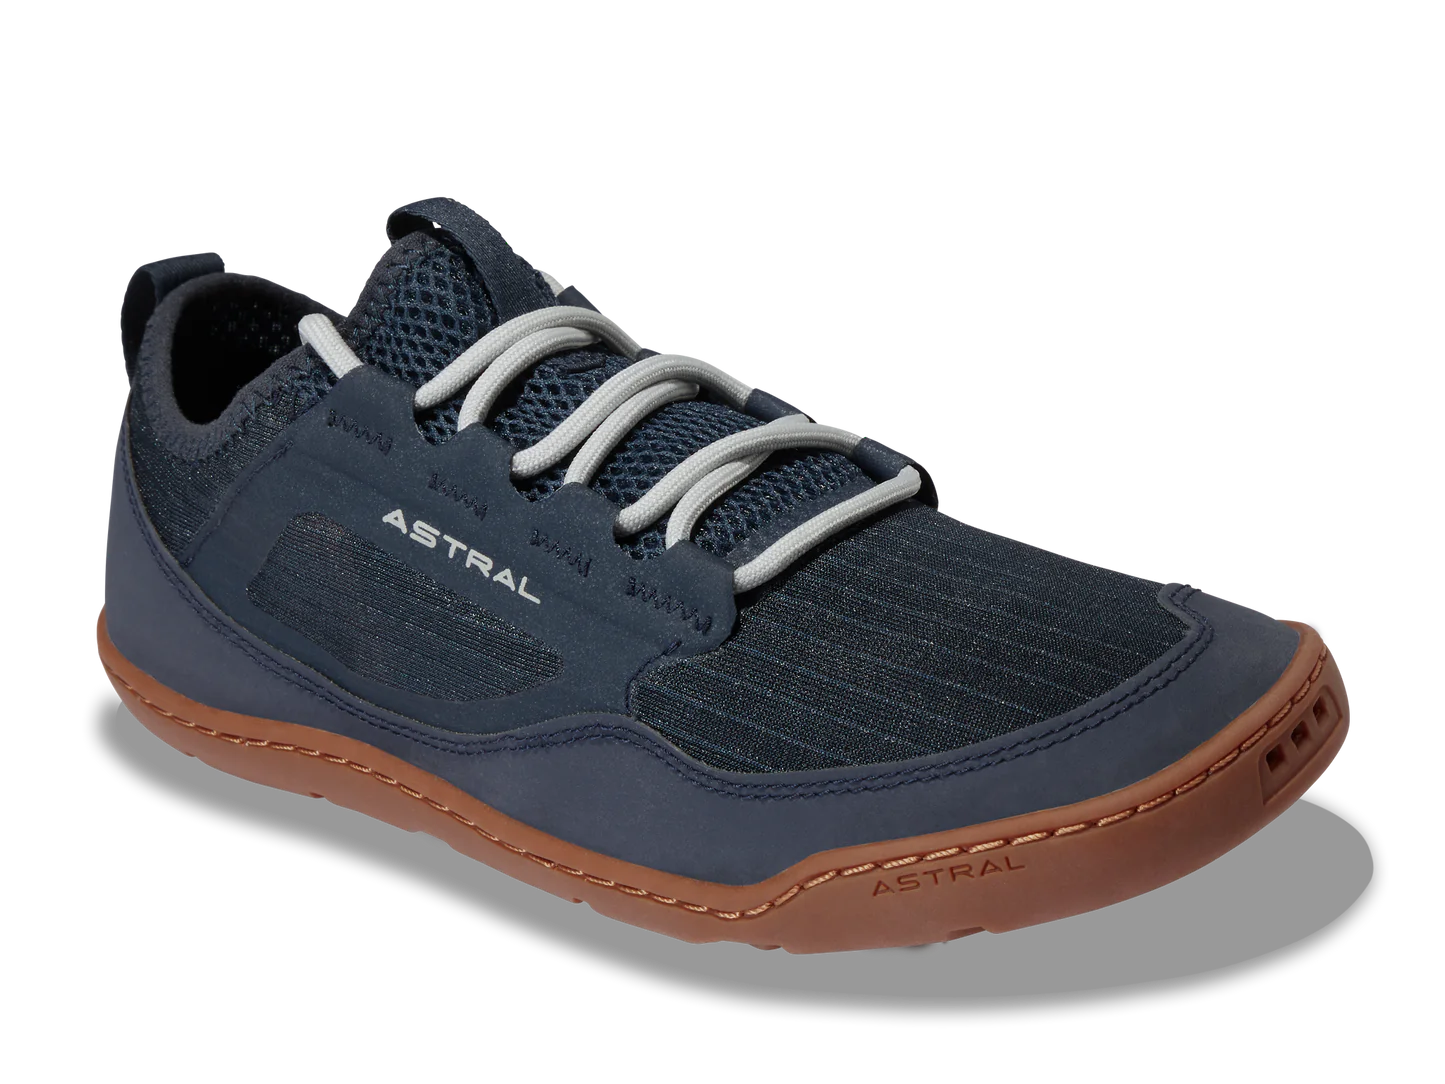 Astral Loyak AC Women's Water Shoes